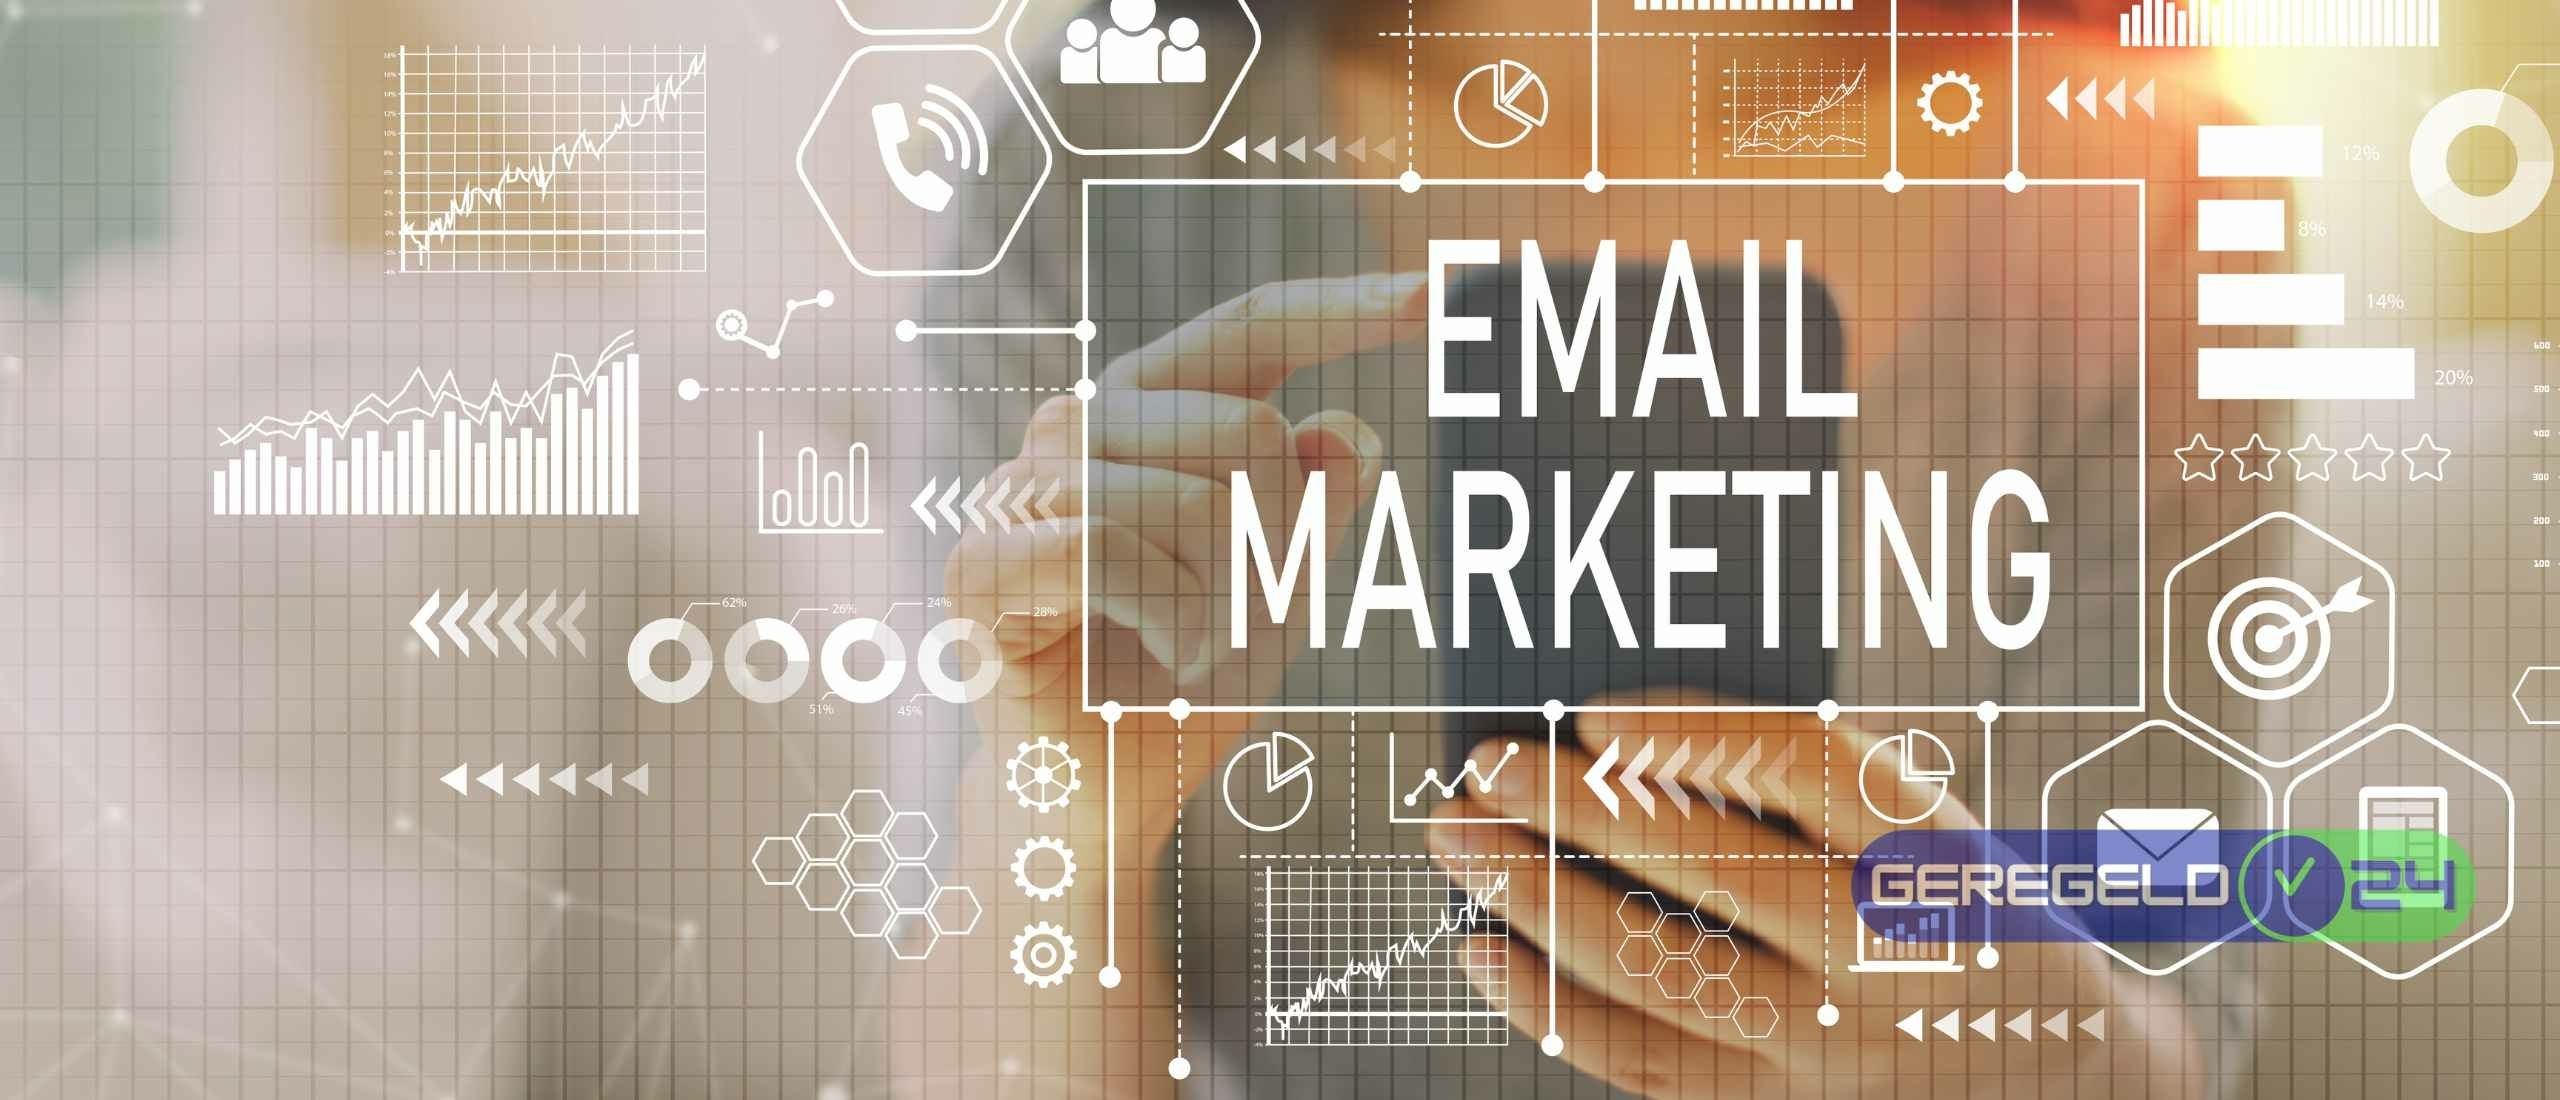 Email marketing: The money is in the list!